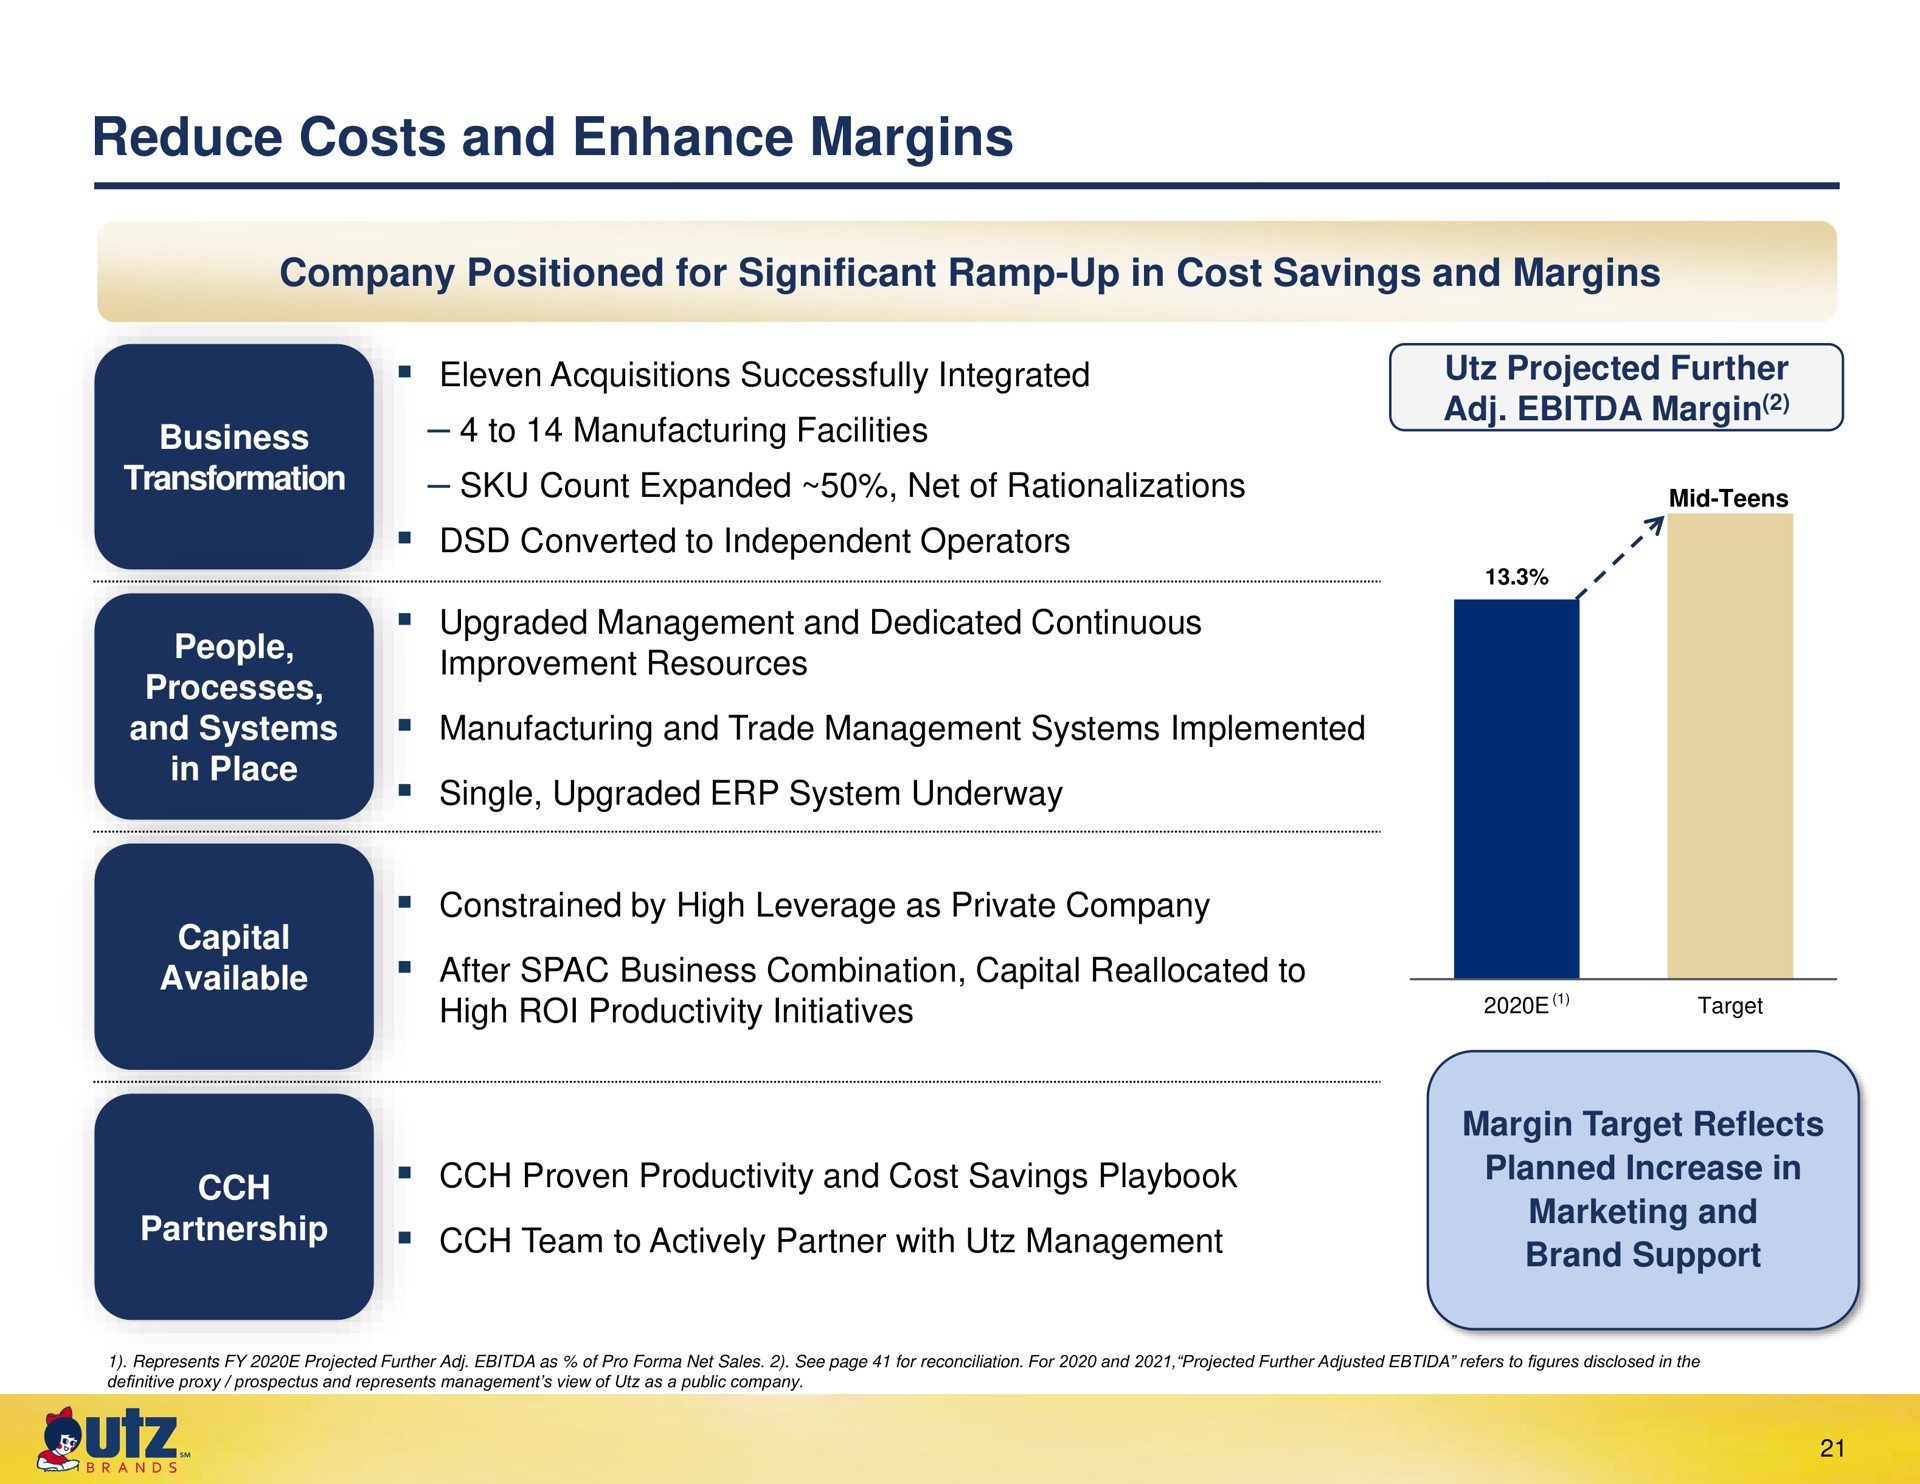 reduce costs and enhance margins eleven acquisitions successfully integrated count expanded net of rationalizations converted to independent operators projected further on proven productivity cost savings playbook planned increase in | UTZ Brands